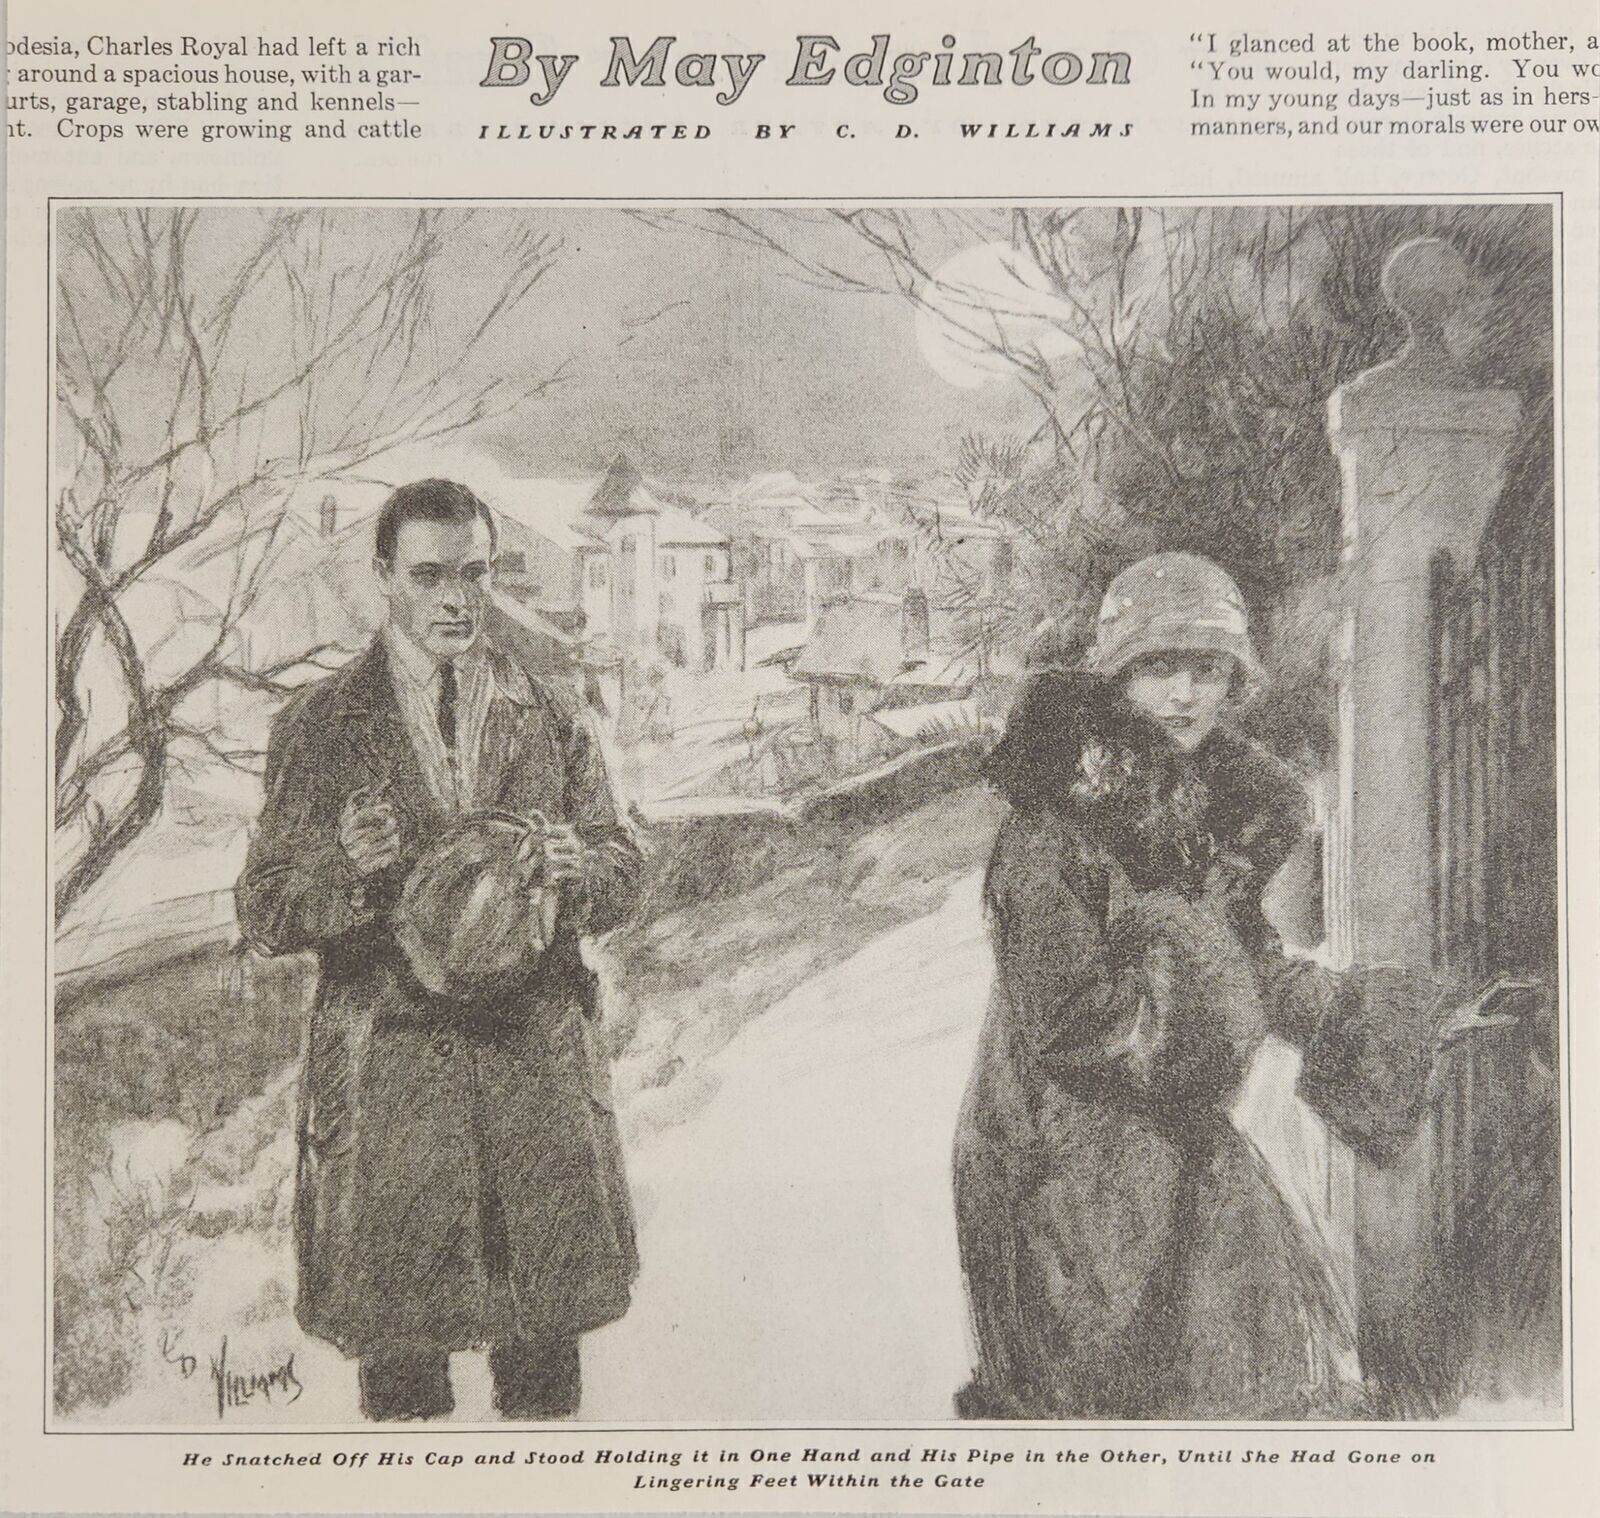 1925 Magazine Picture Man Holds Smoking Pipe & Lady Illustrated by C.D. Williams